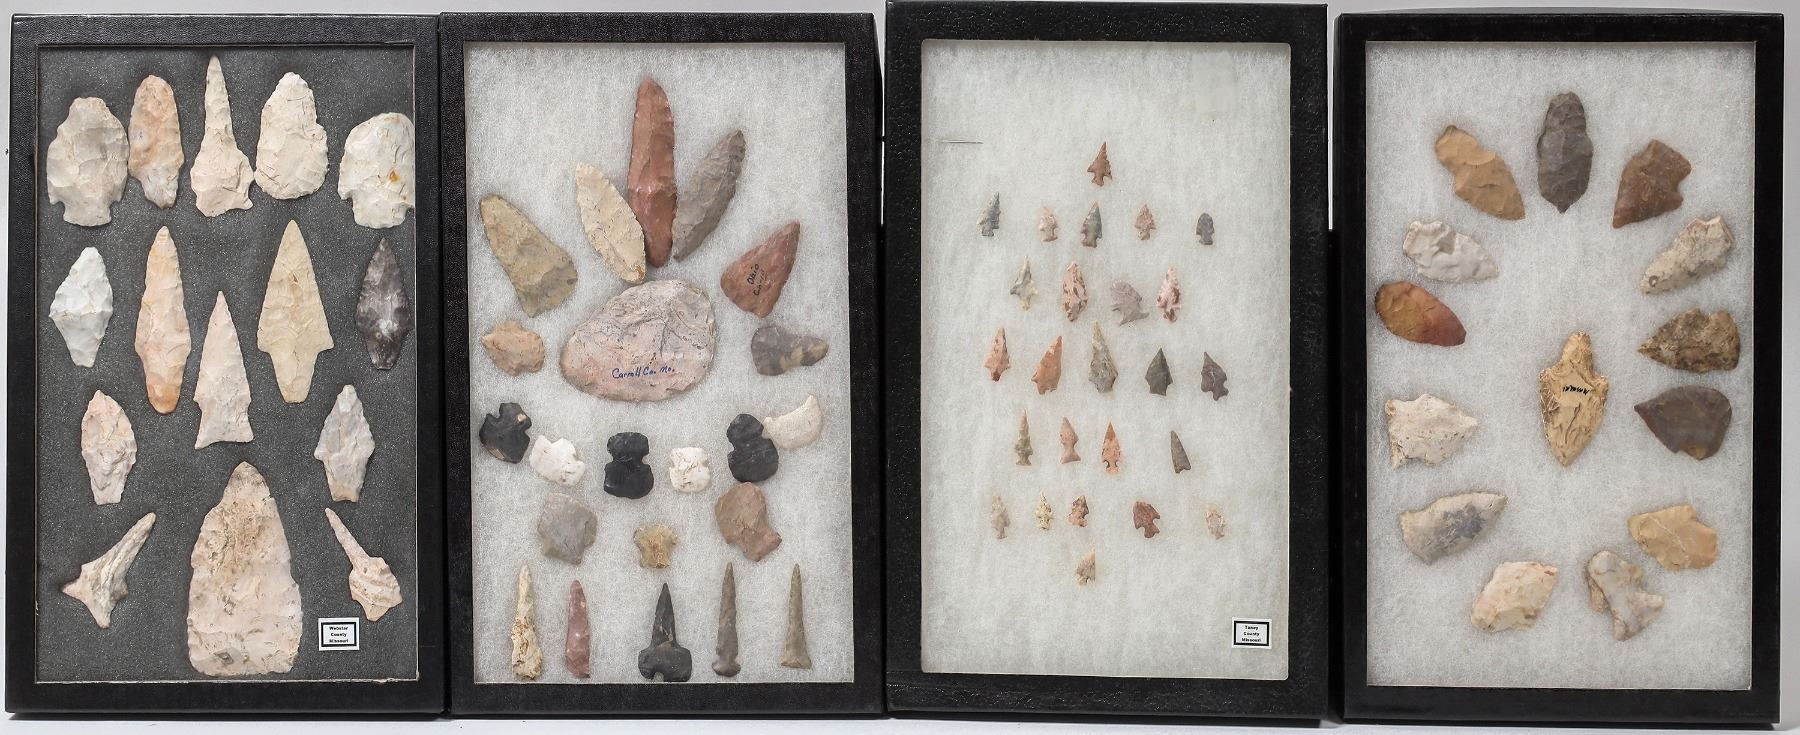 Collection of roughly 230 Missouri projectile points (aka arrowheads), est. $2,000-$4,000